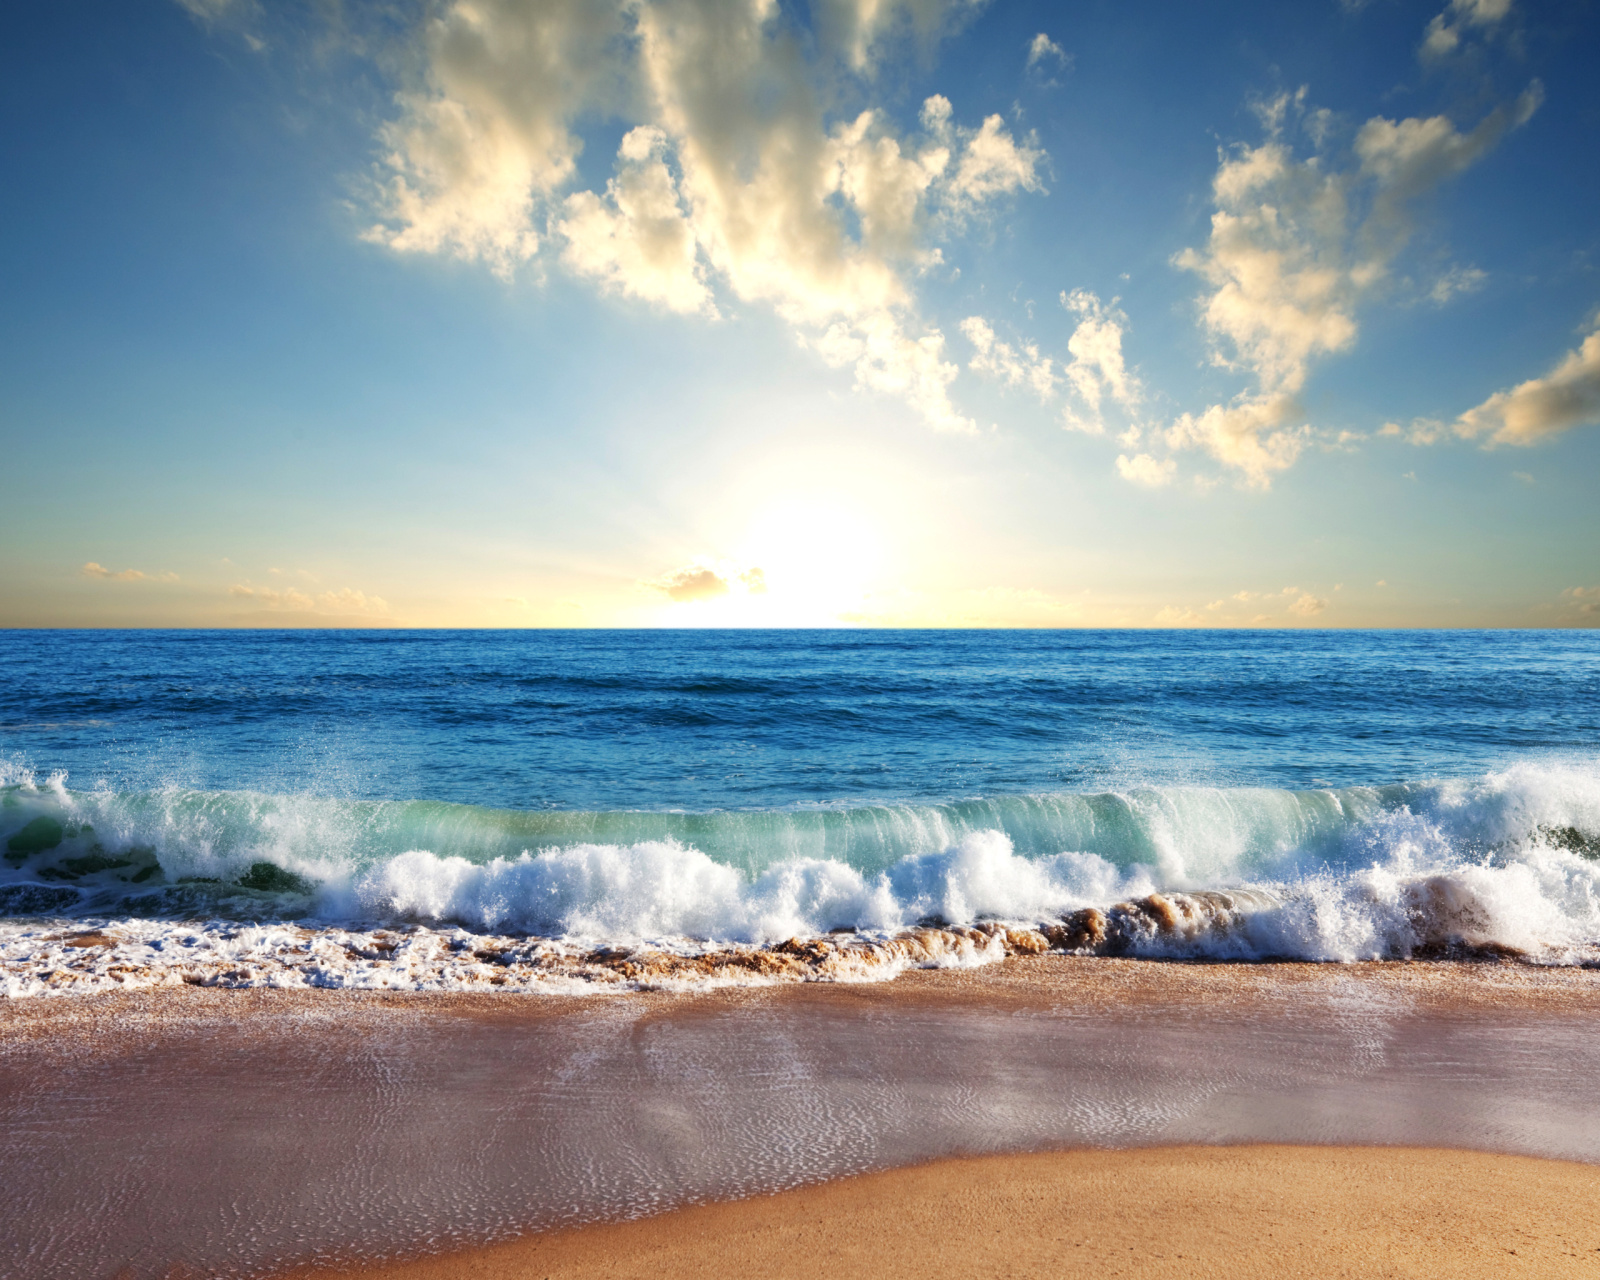 Beach and Waves wallpaper 1600x1280